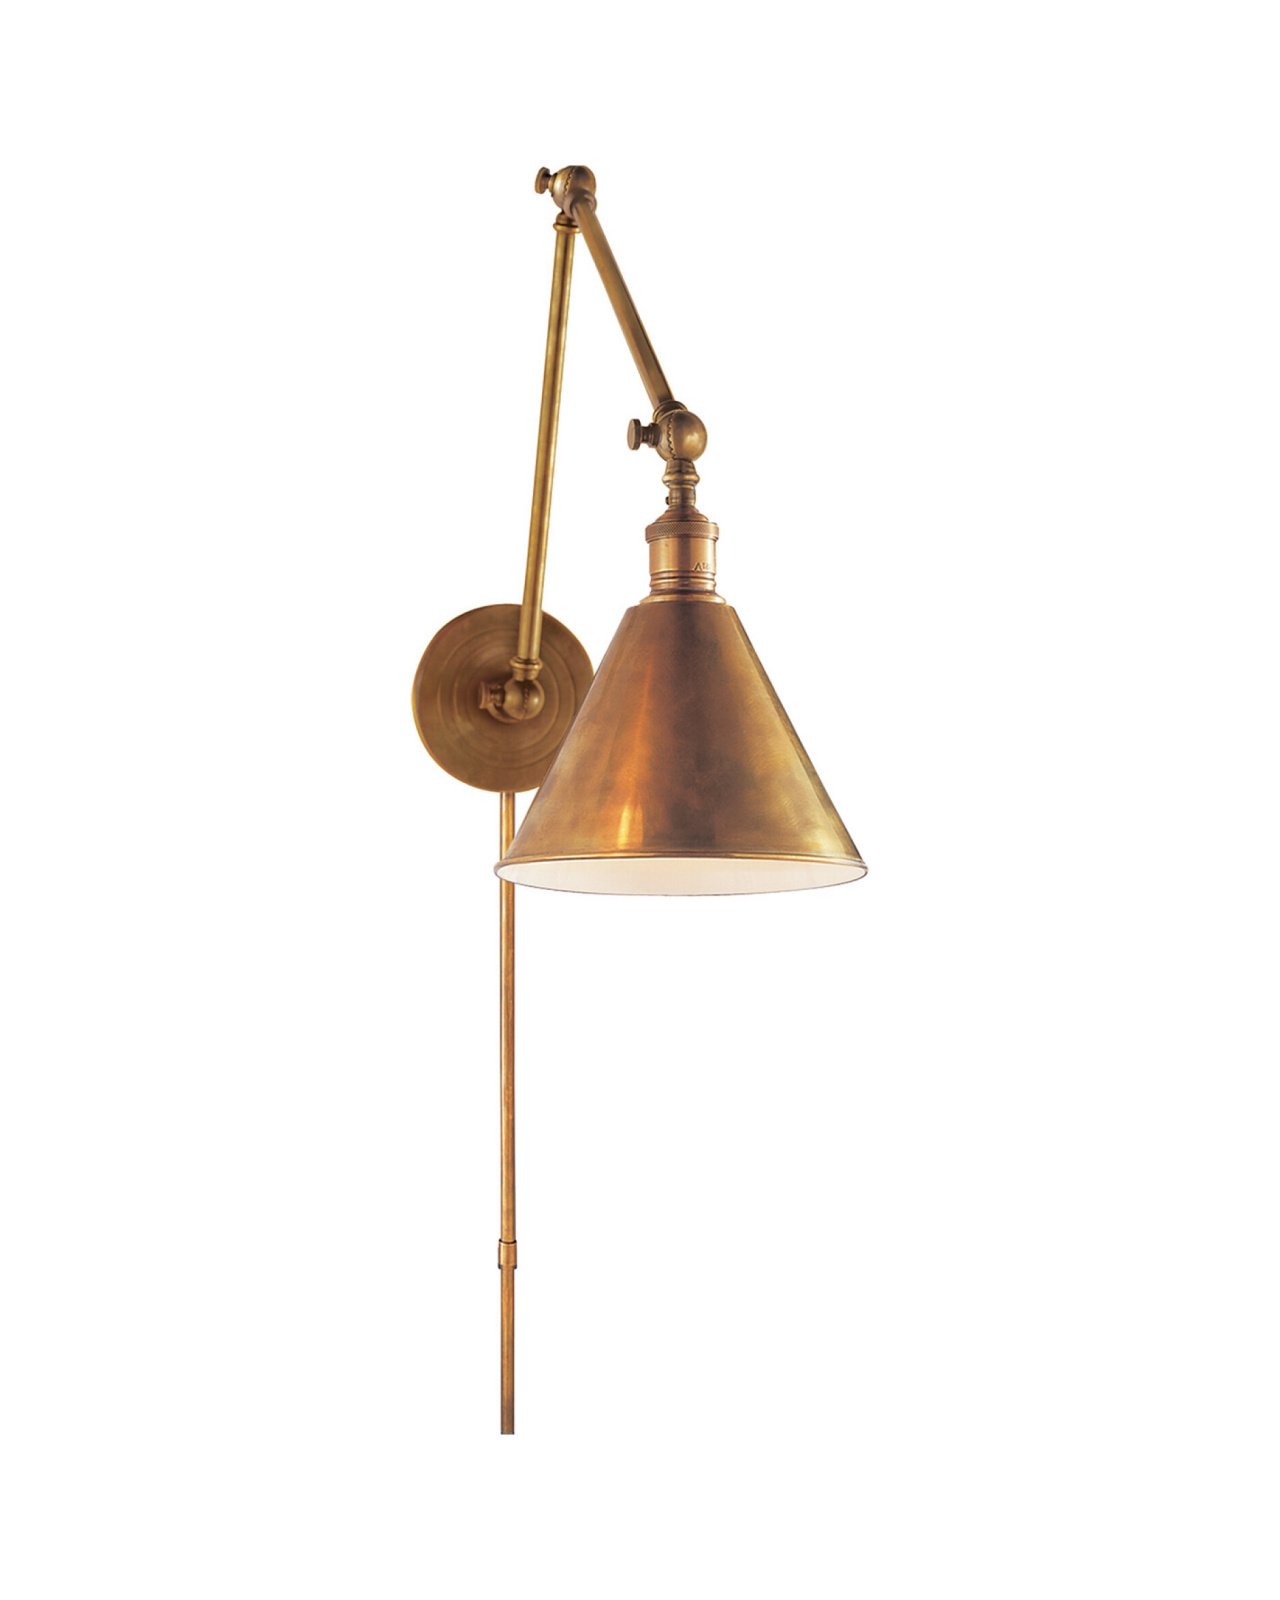 Double Boston Functional Library Light Antique Brass